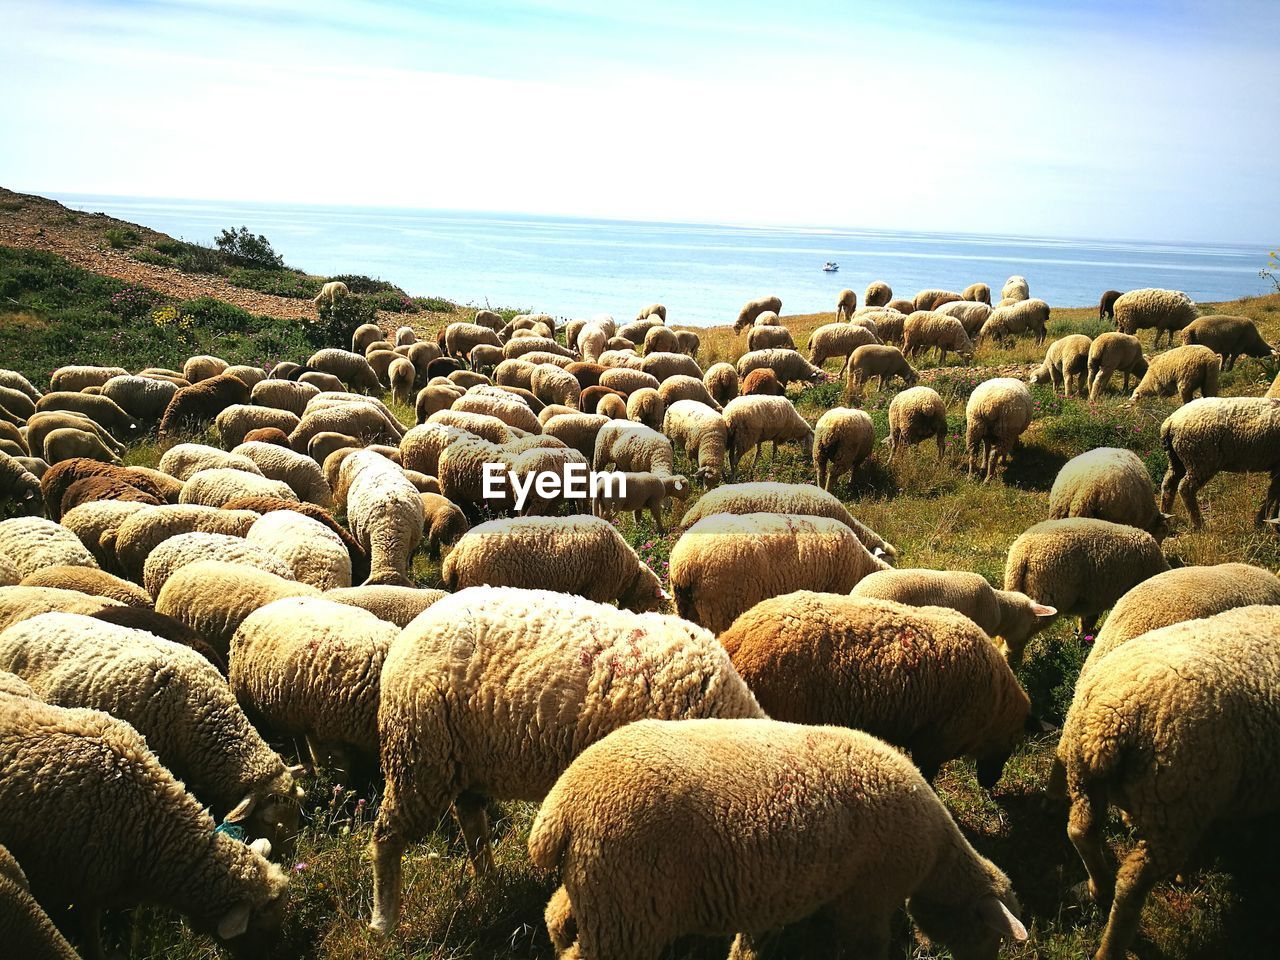 FLOCK OF SHEEP ON SHORE